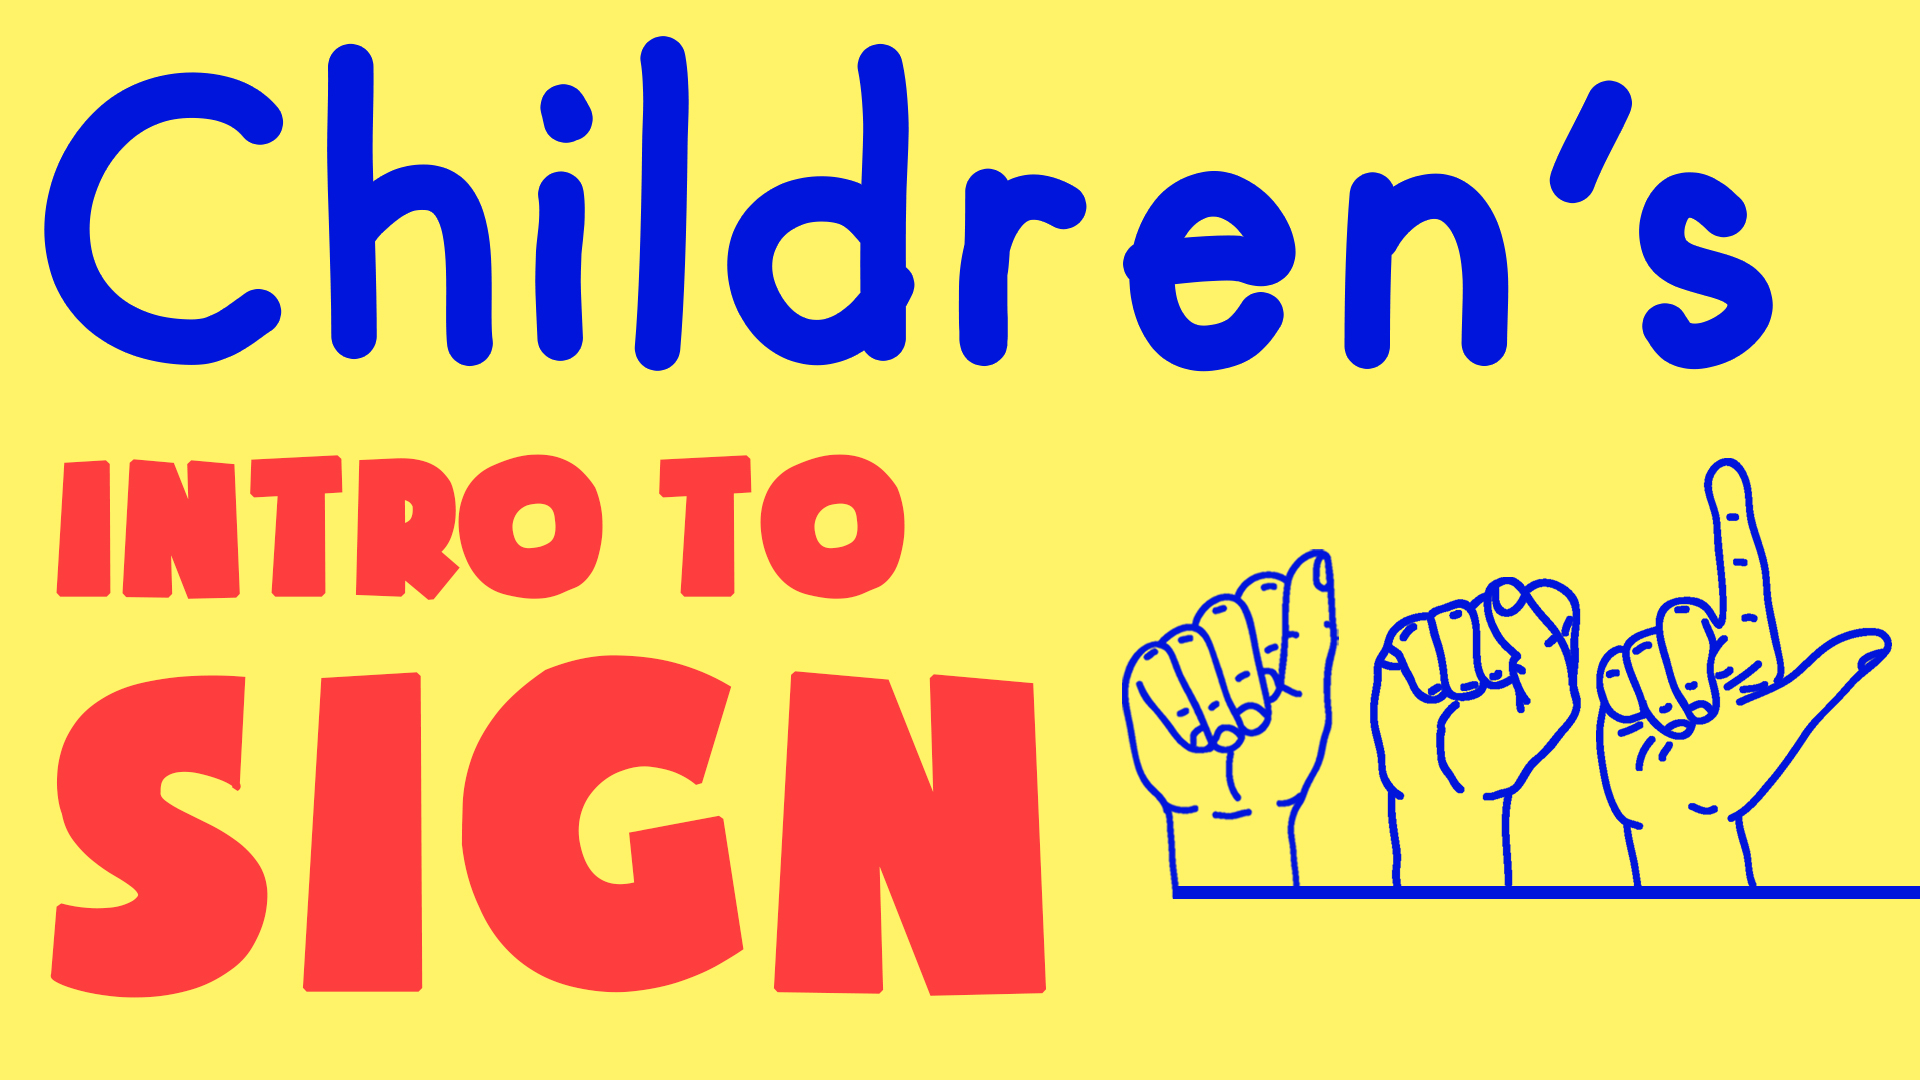 Image reads "Children's Intro to Sign" against a yellow background. Outlines of hands using sign language to spell "ASL" are to the right of the title. 